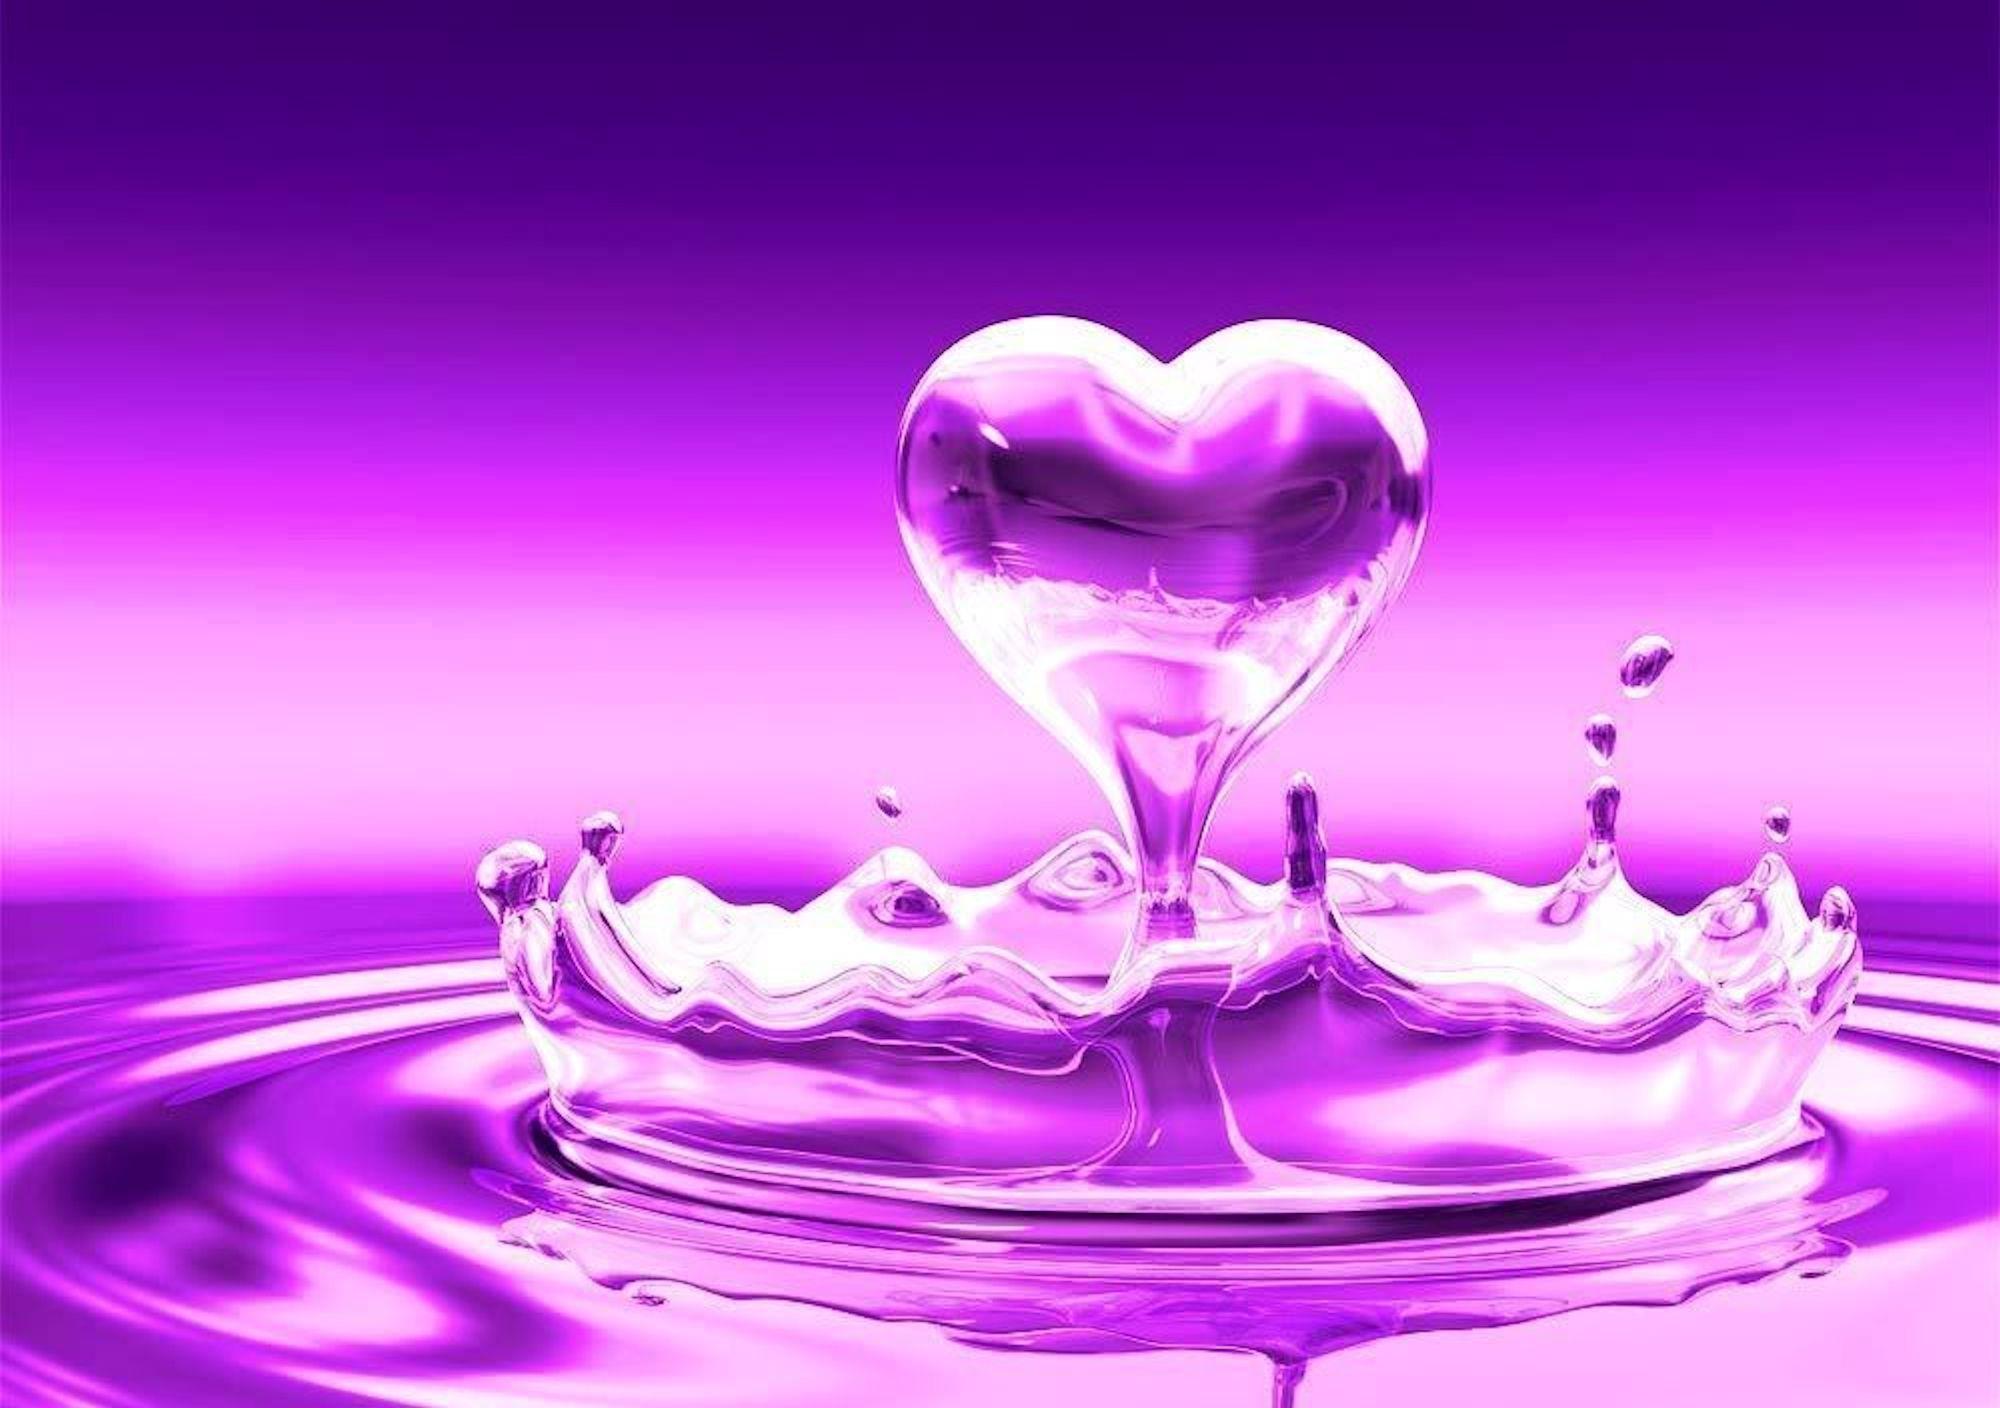 Purple Heart Wallpaper Discover more Aesthetic Android Background  beautiful Cute wallpapers  Heart wallpaper Iphone wallpaper violet  Purple galaxy wallpaper